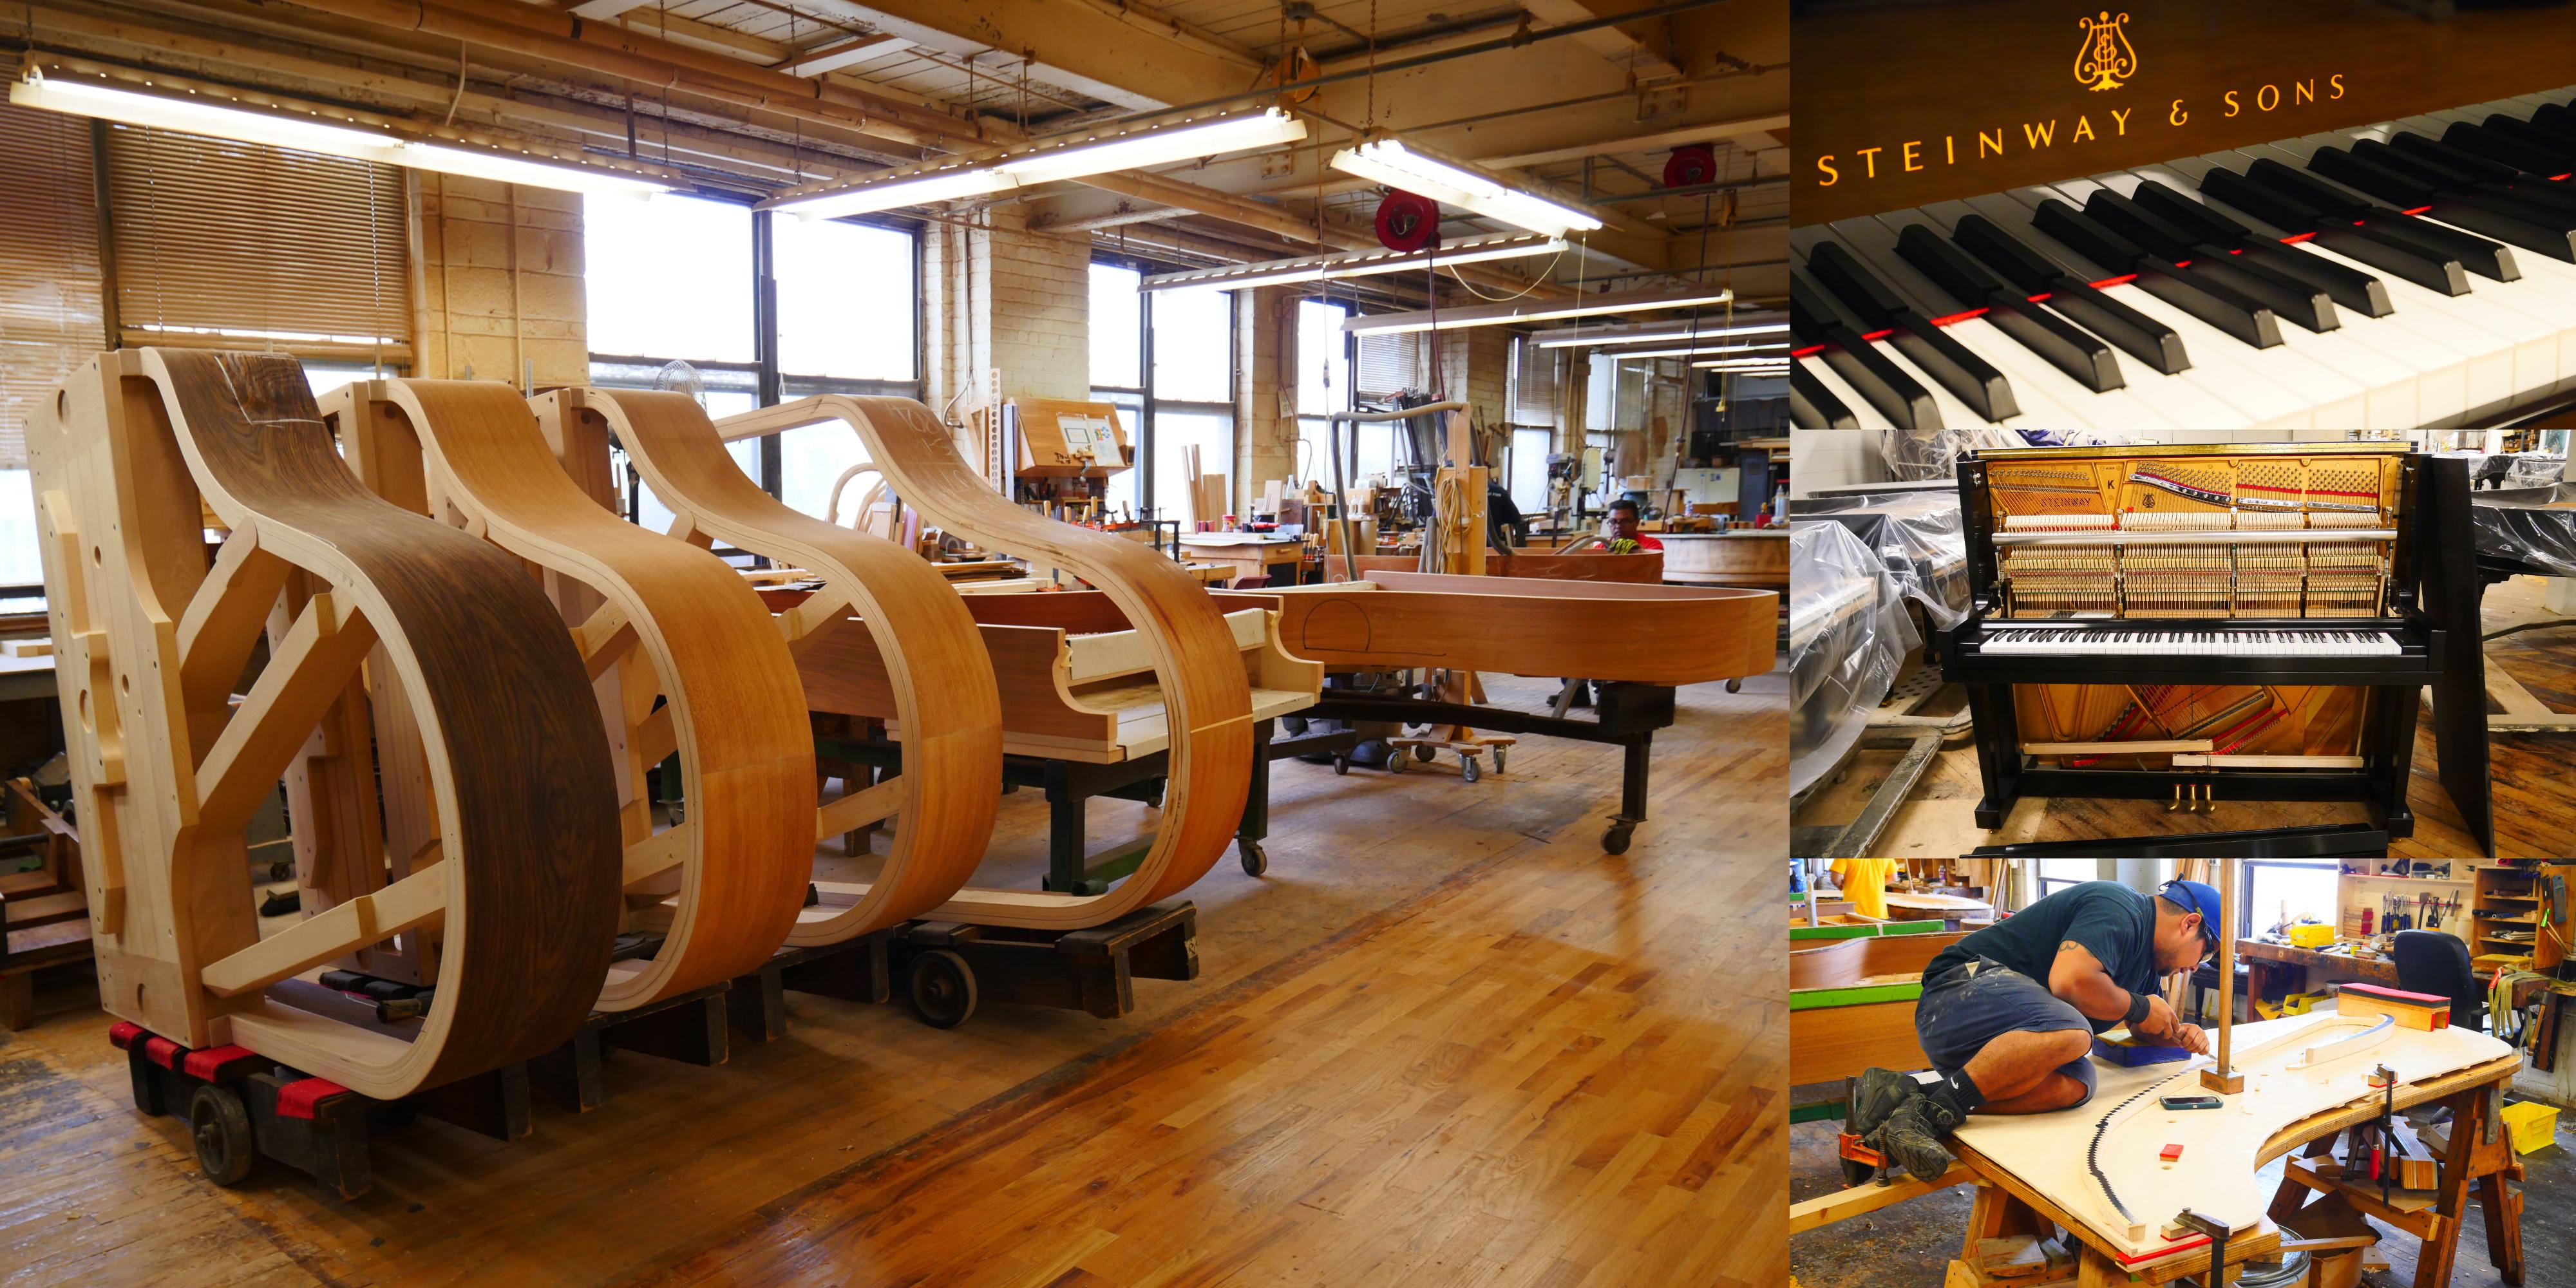 Following the Journey of a Piano @ Steinway & Sons Piano Factory